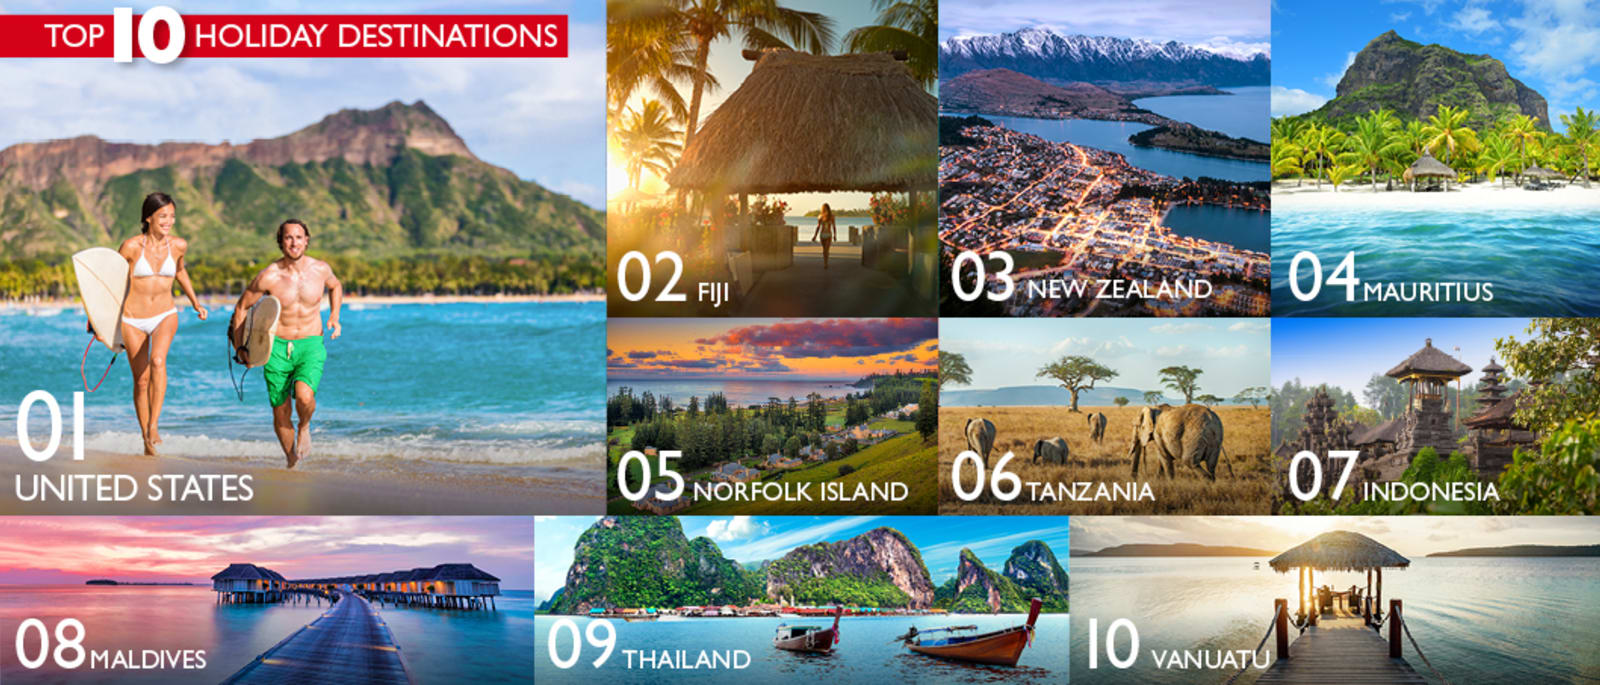 Our top 10 holiday destinations listed out with destination imagery